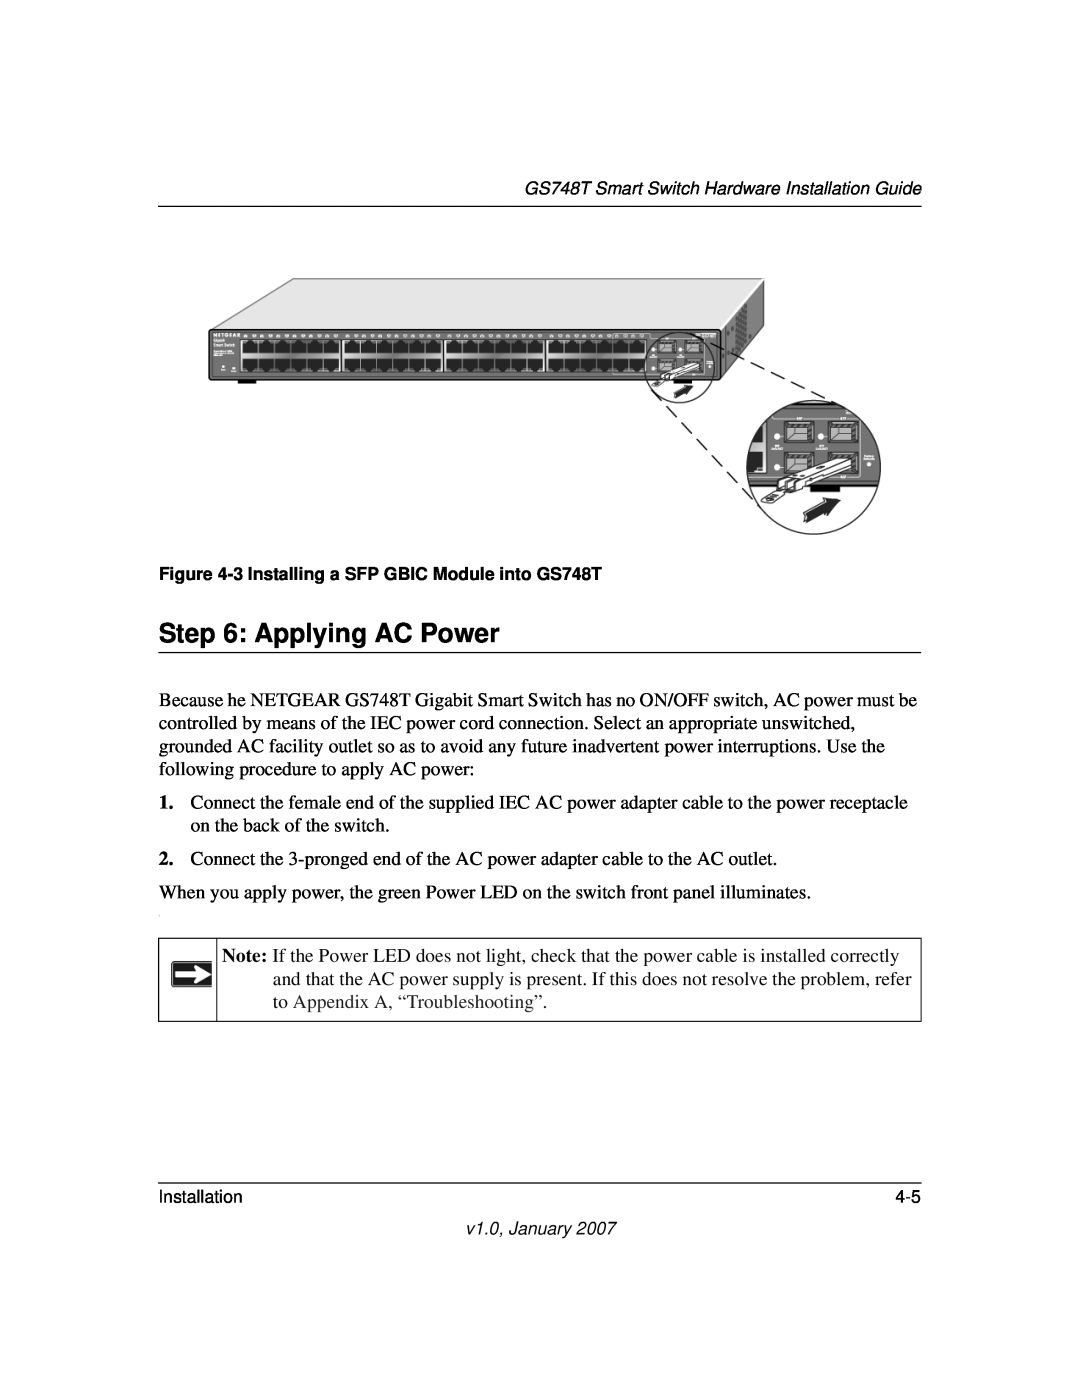 NETGEAR GS748T manual Applying AC Power, to Appendix A, “Troubleshooting” 